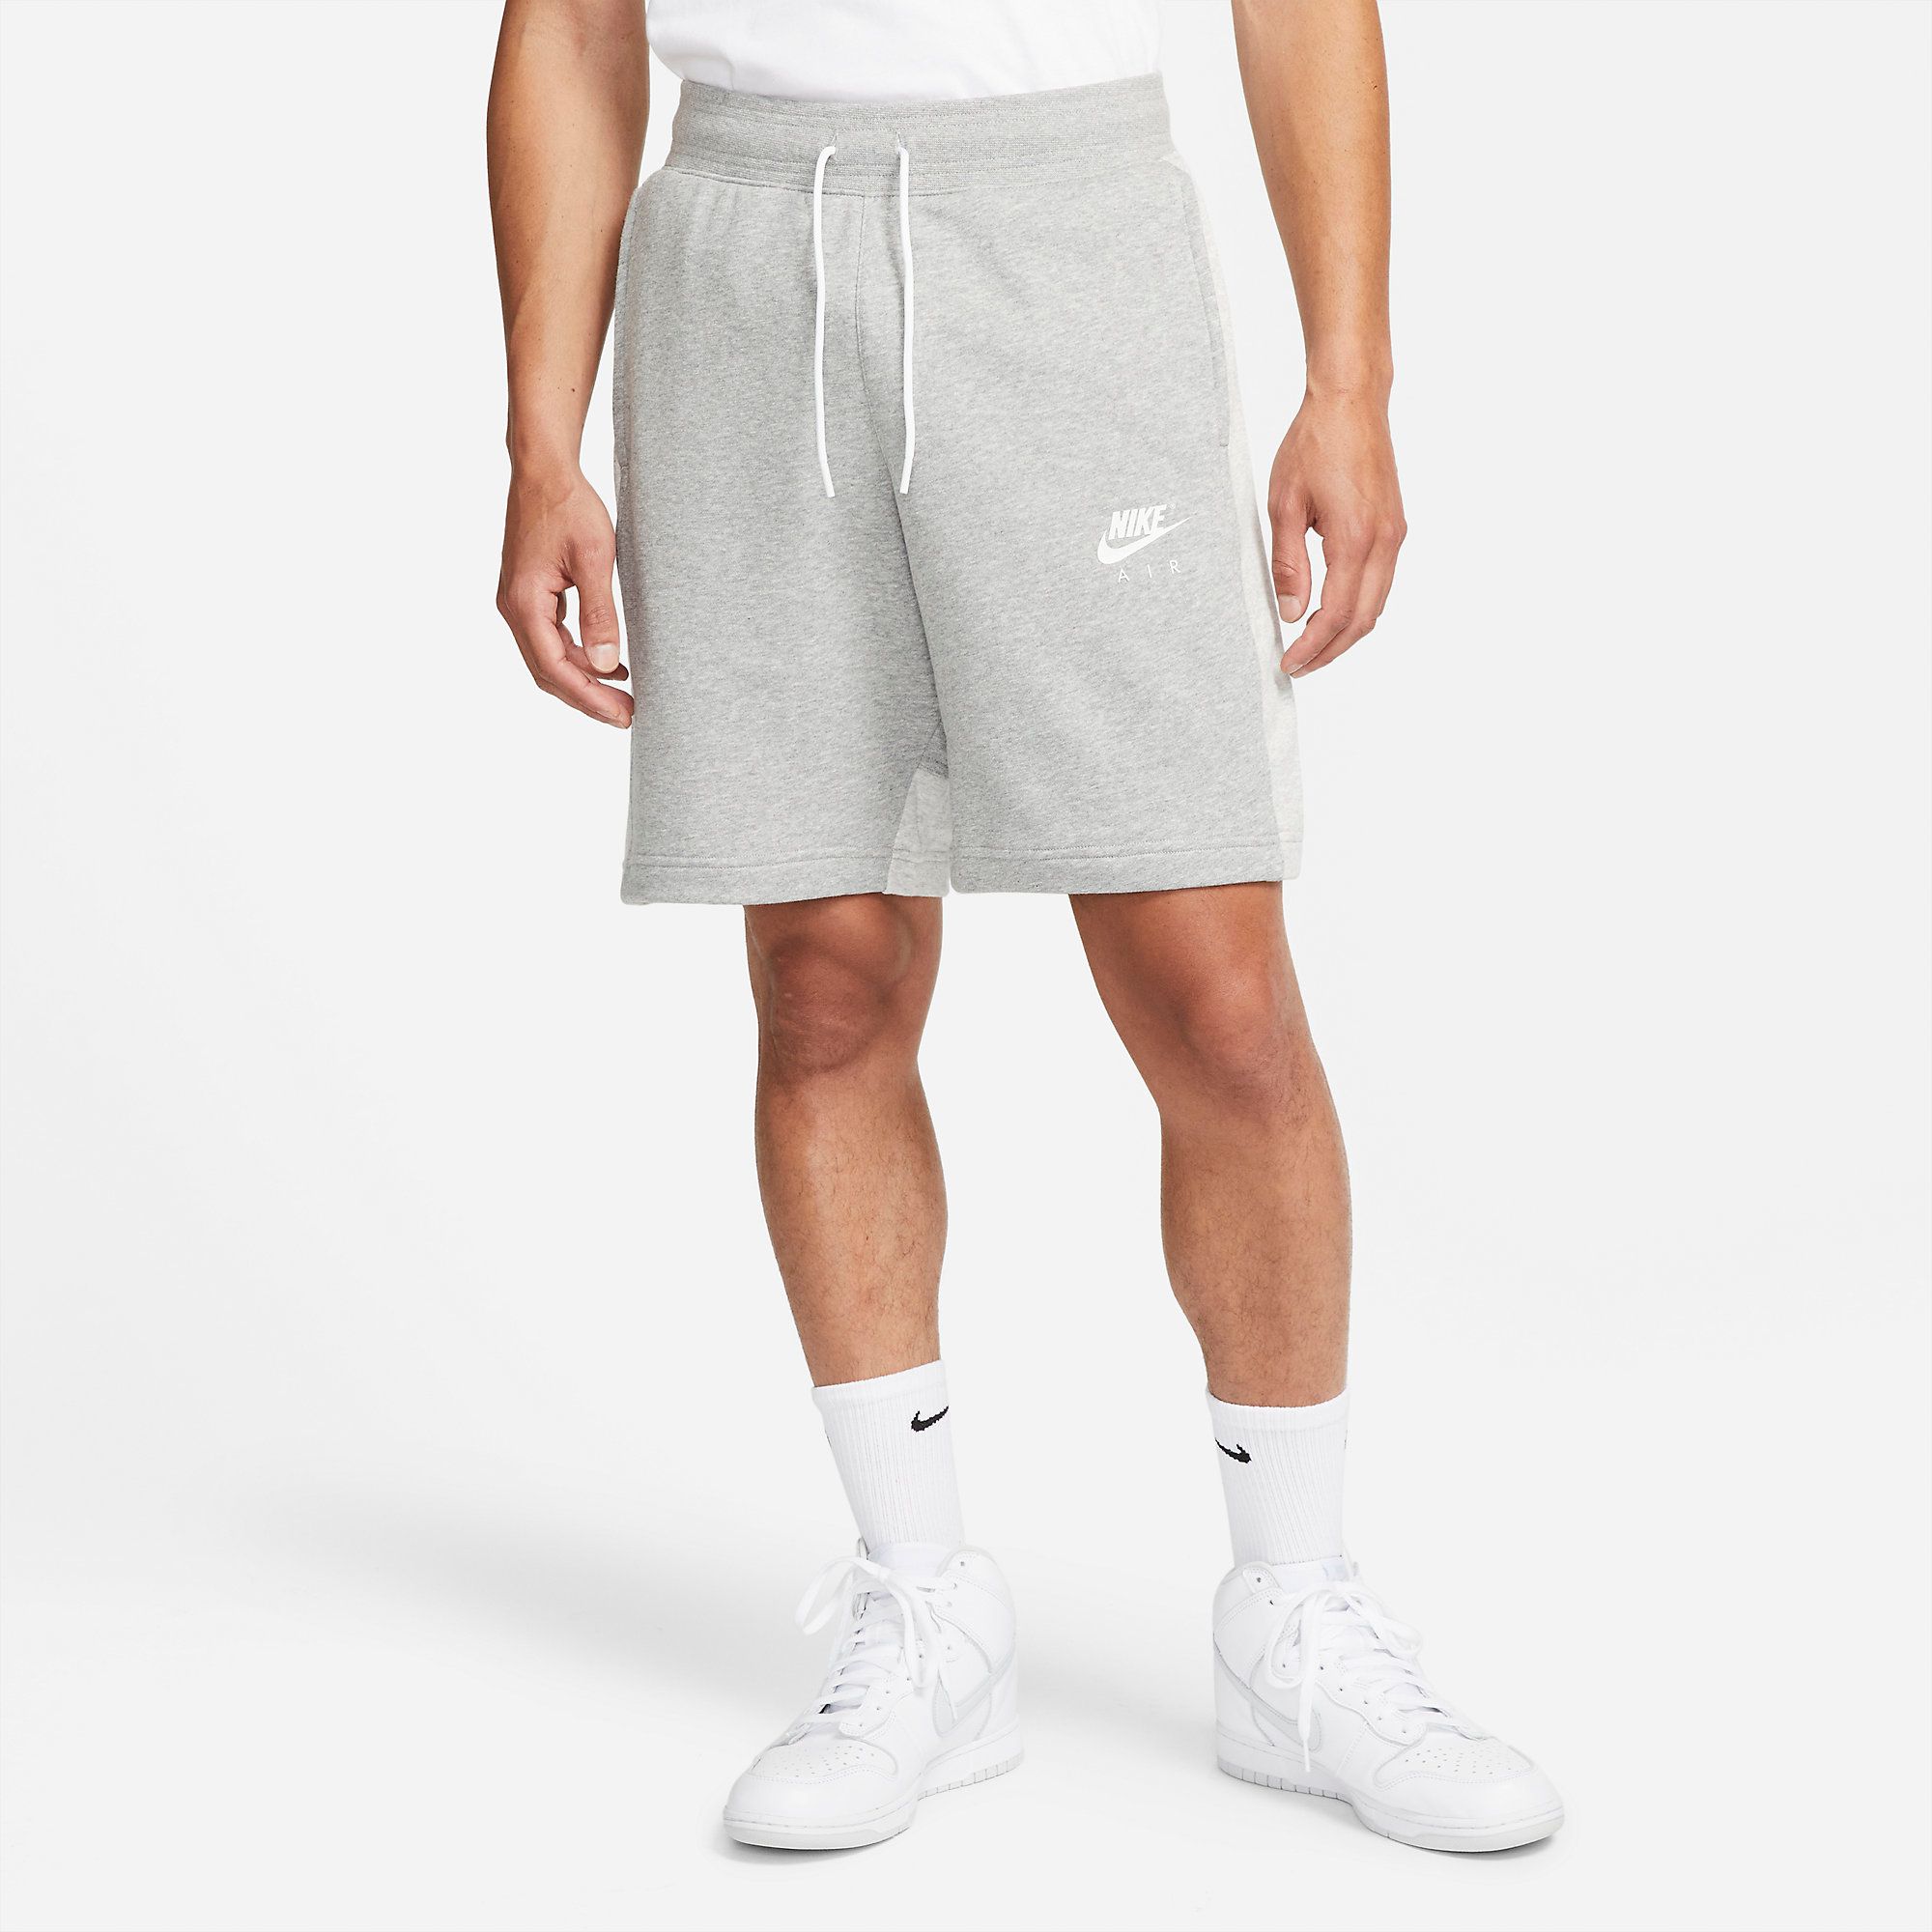  Nike Air French Terry Shorts - Grey Heather 